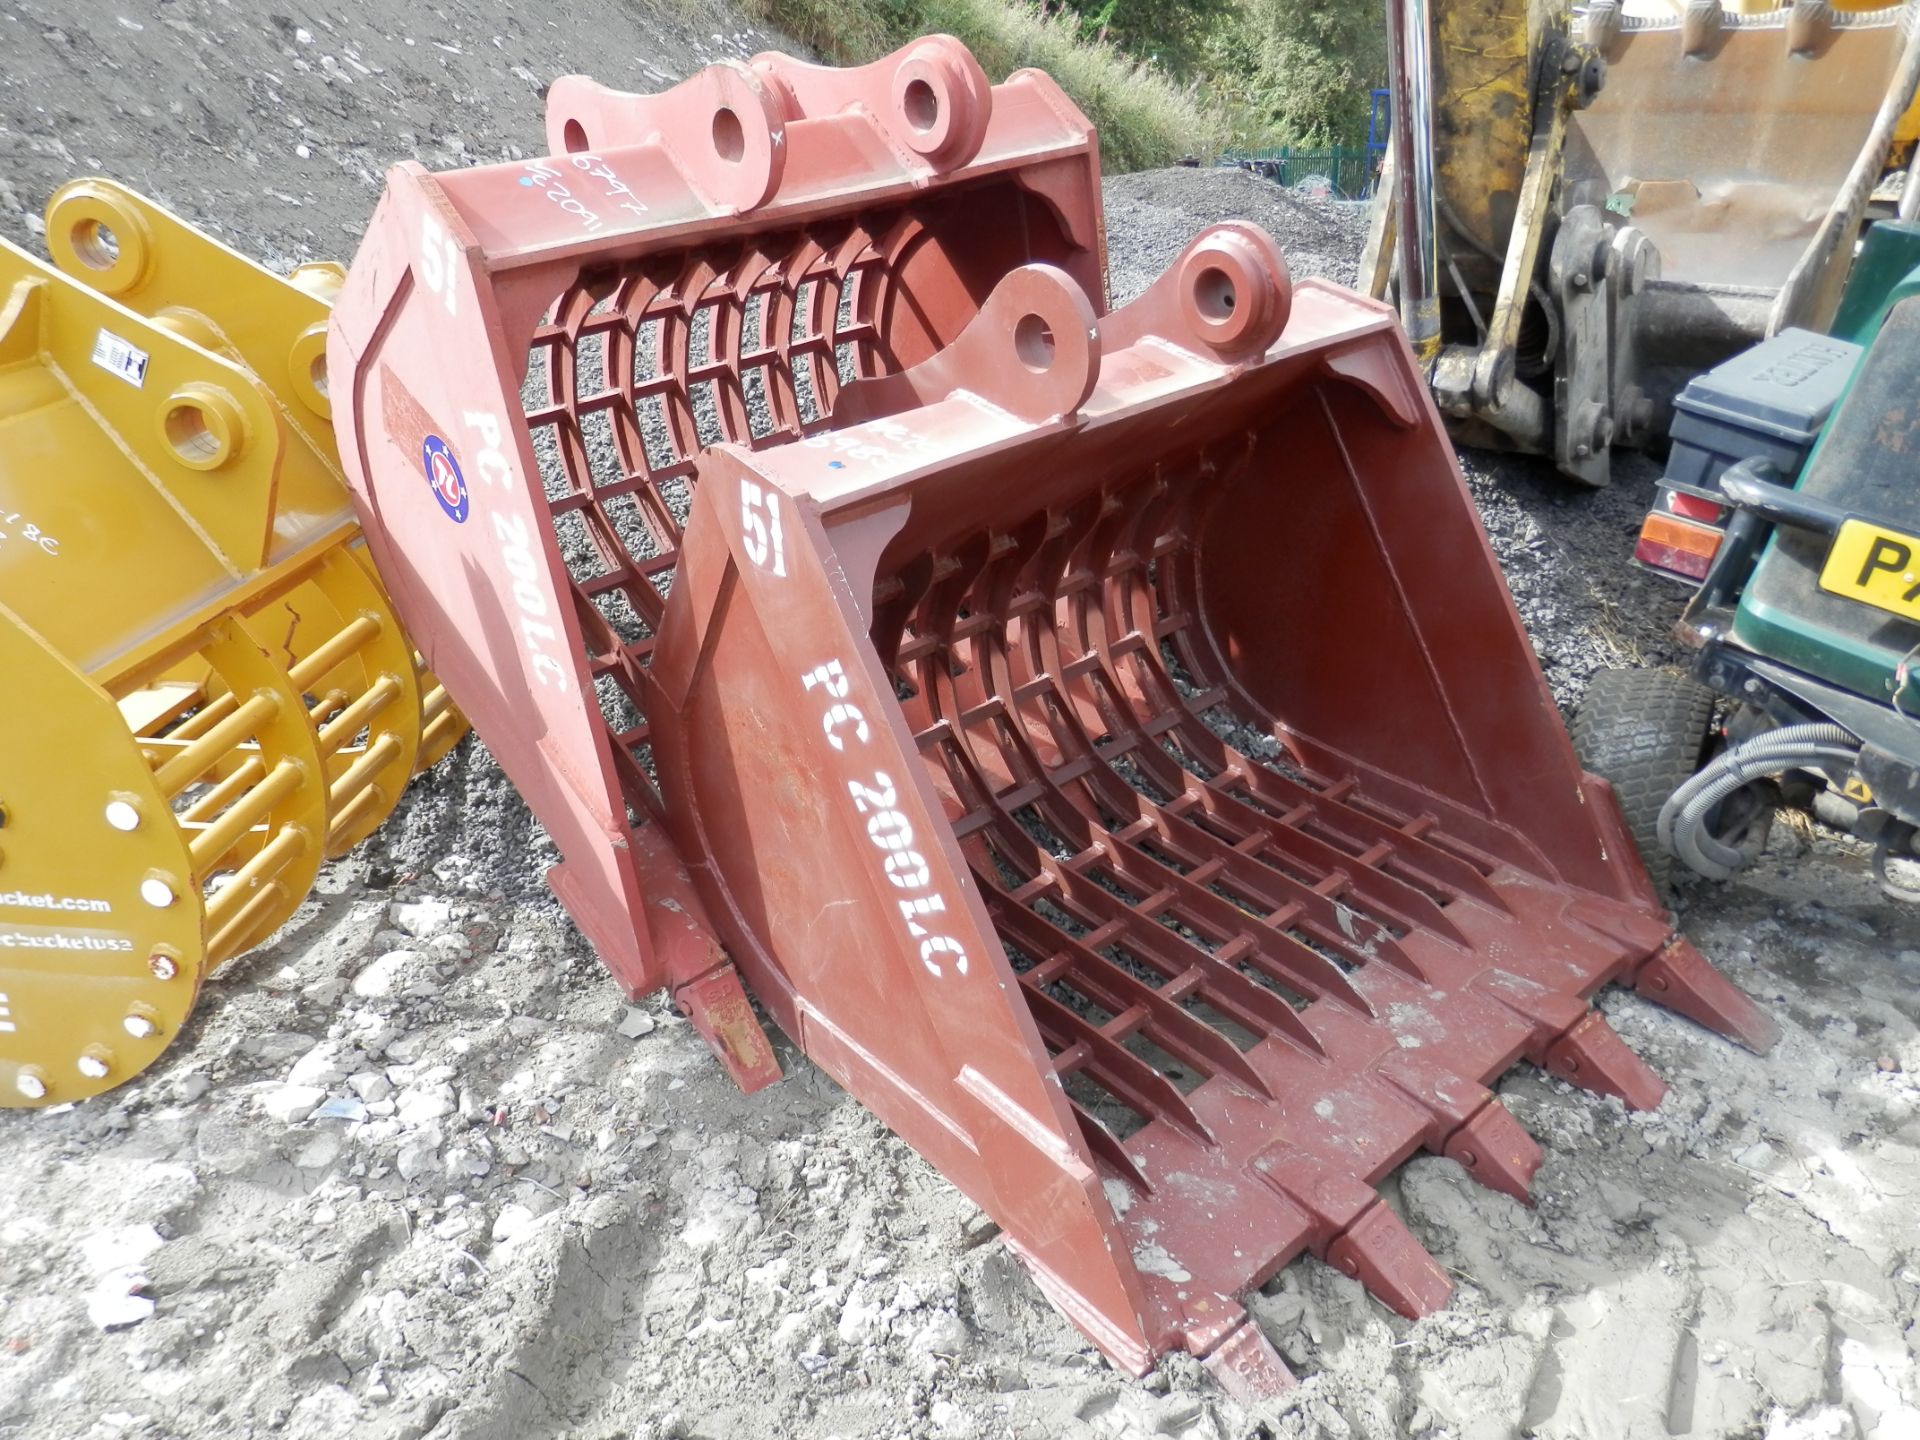 DS - 1 X RIDDLE BUCKET TO FIT KOMATSU DIGGER. NEW & UNUSED.   LISTING IS FOR 1 X RIDDLE BUCKET AS